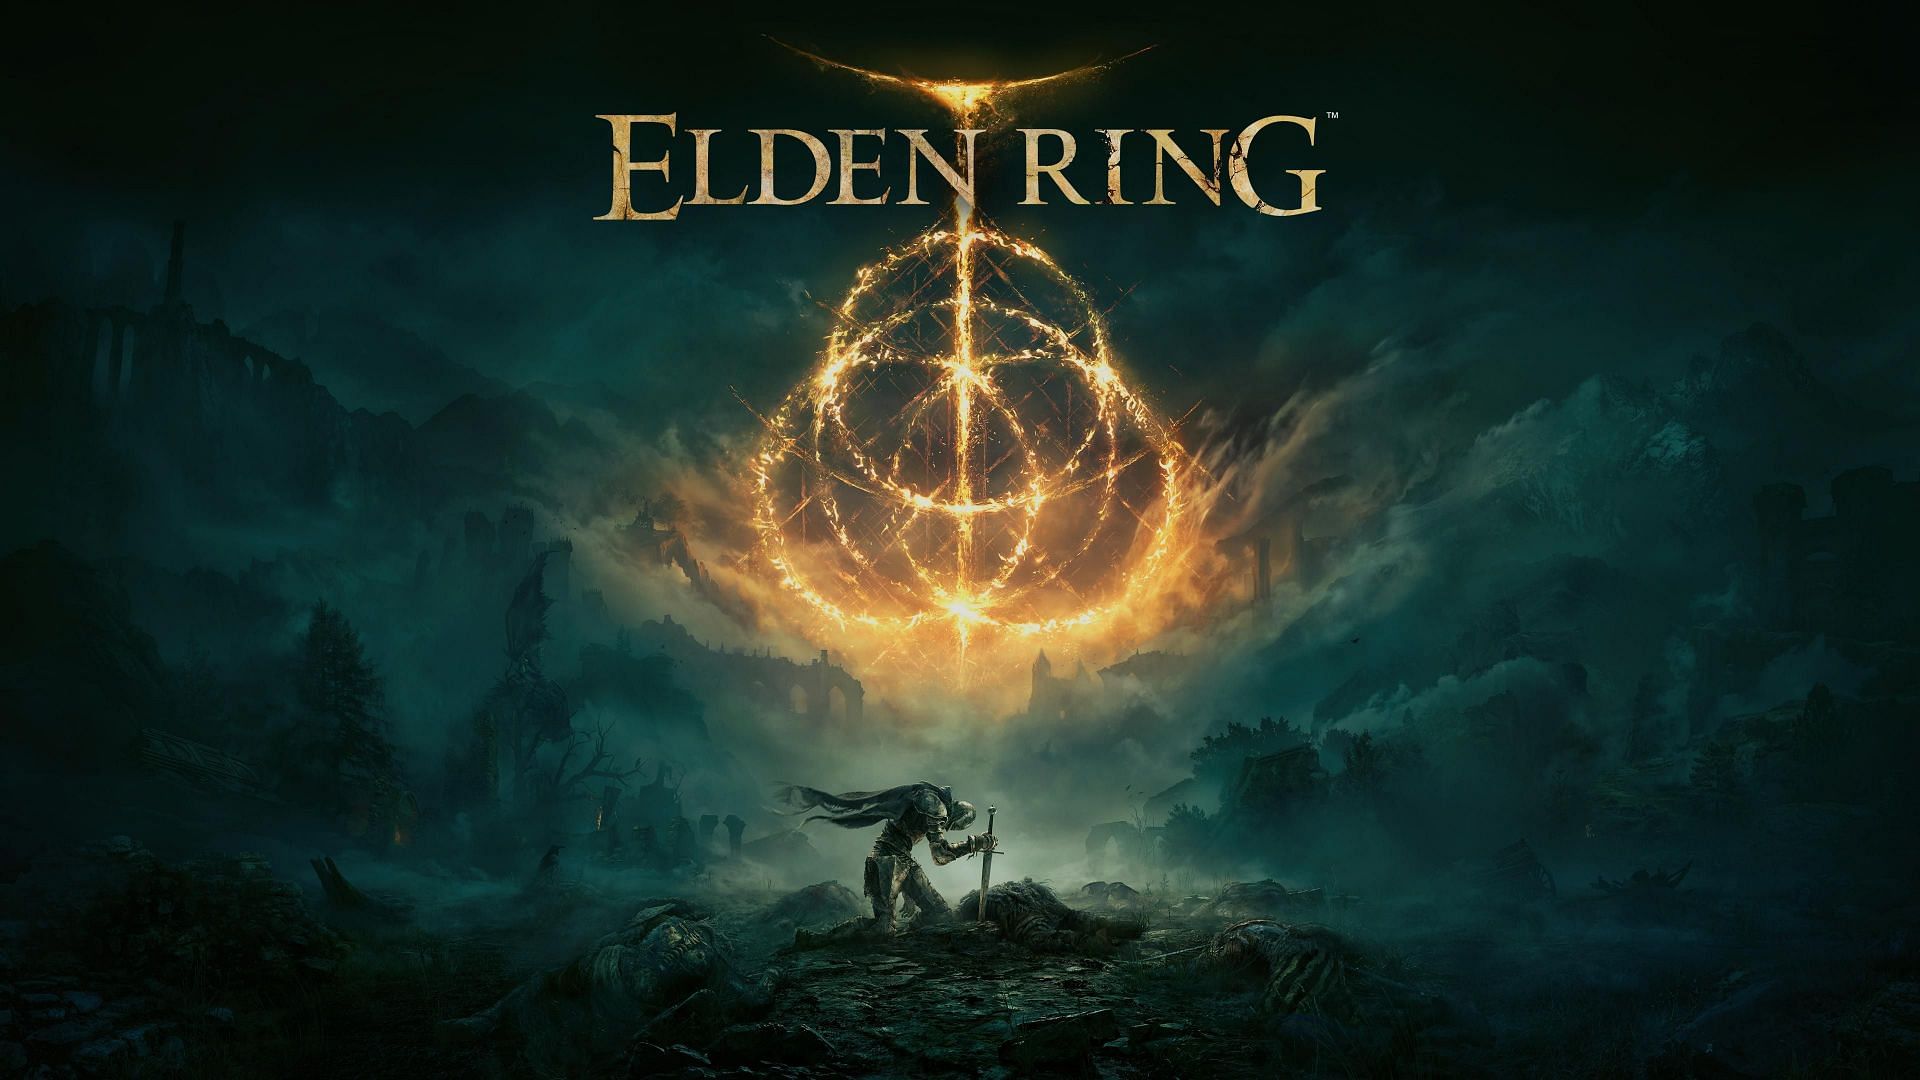 There are numerous side-quests to complete in Elden Ring (Image via Elden Ring)